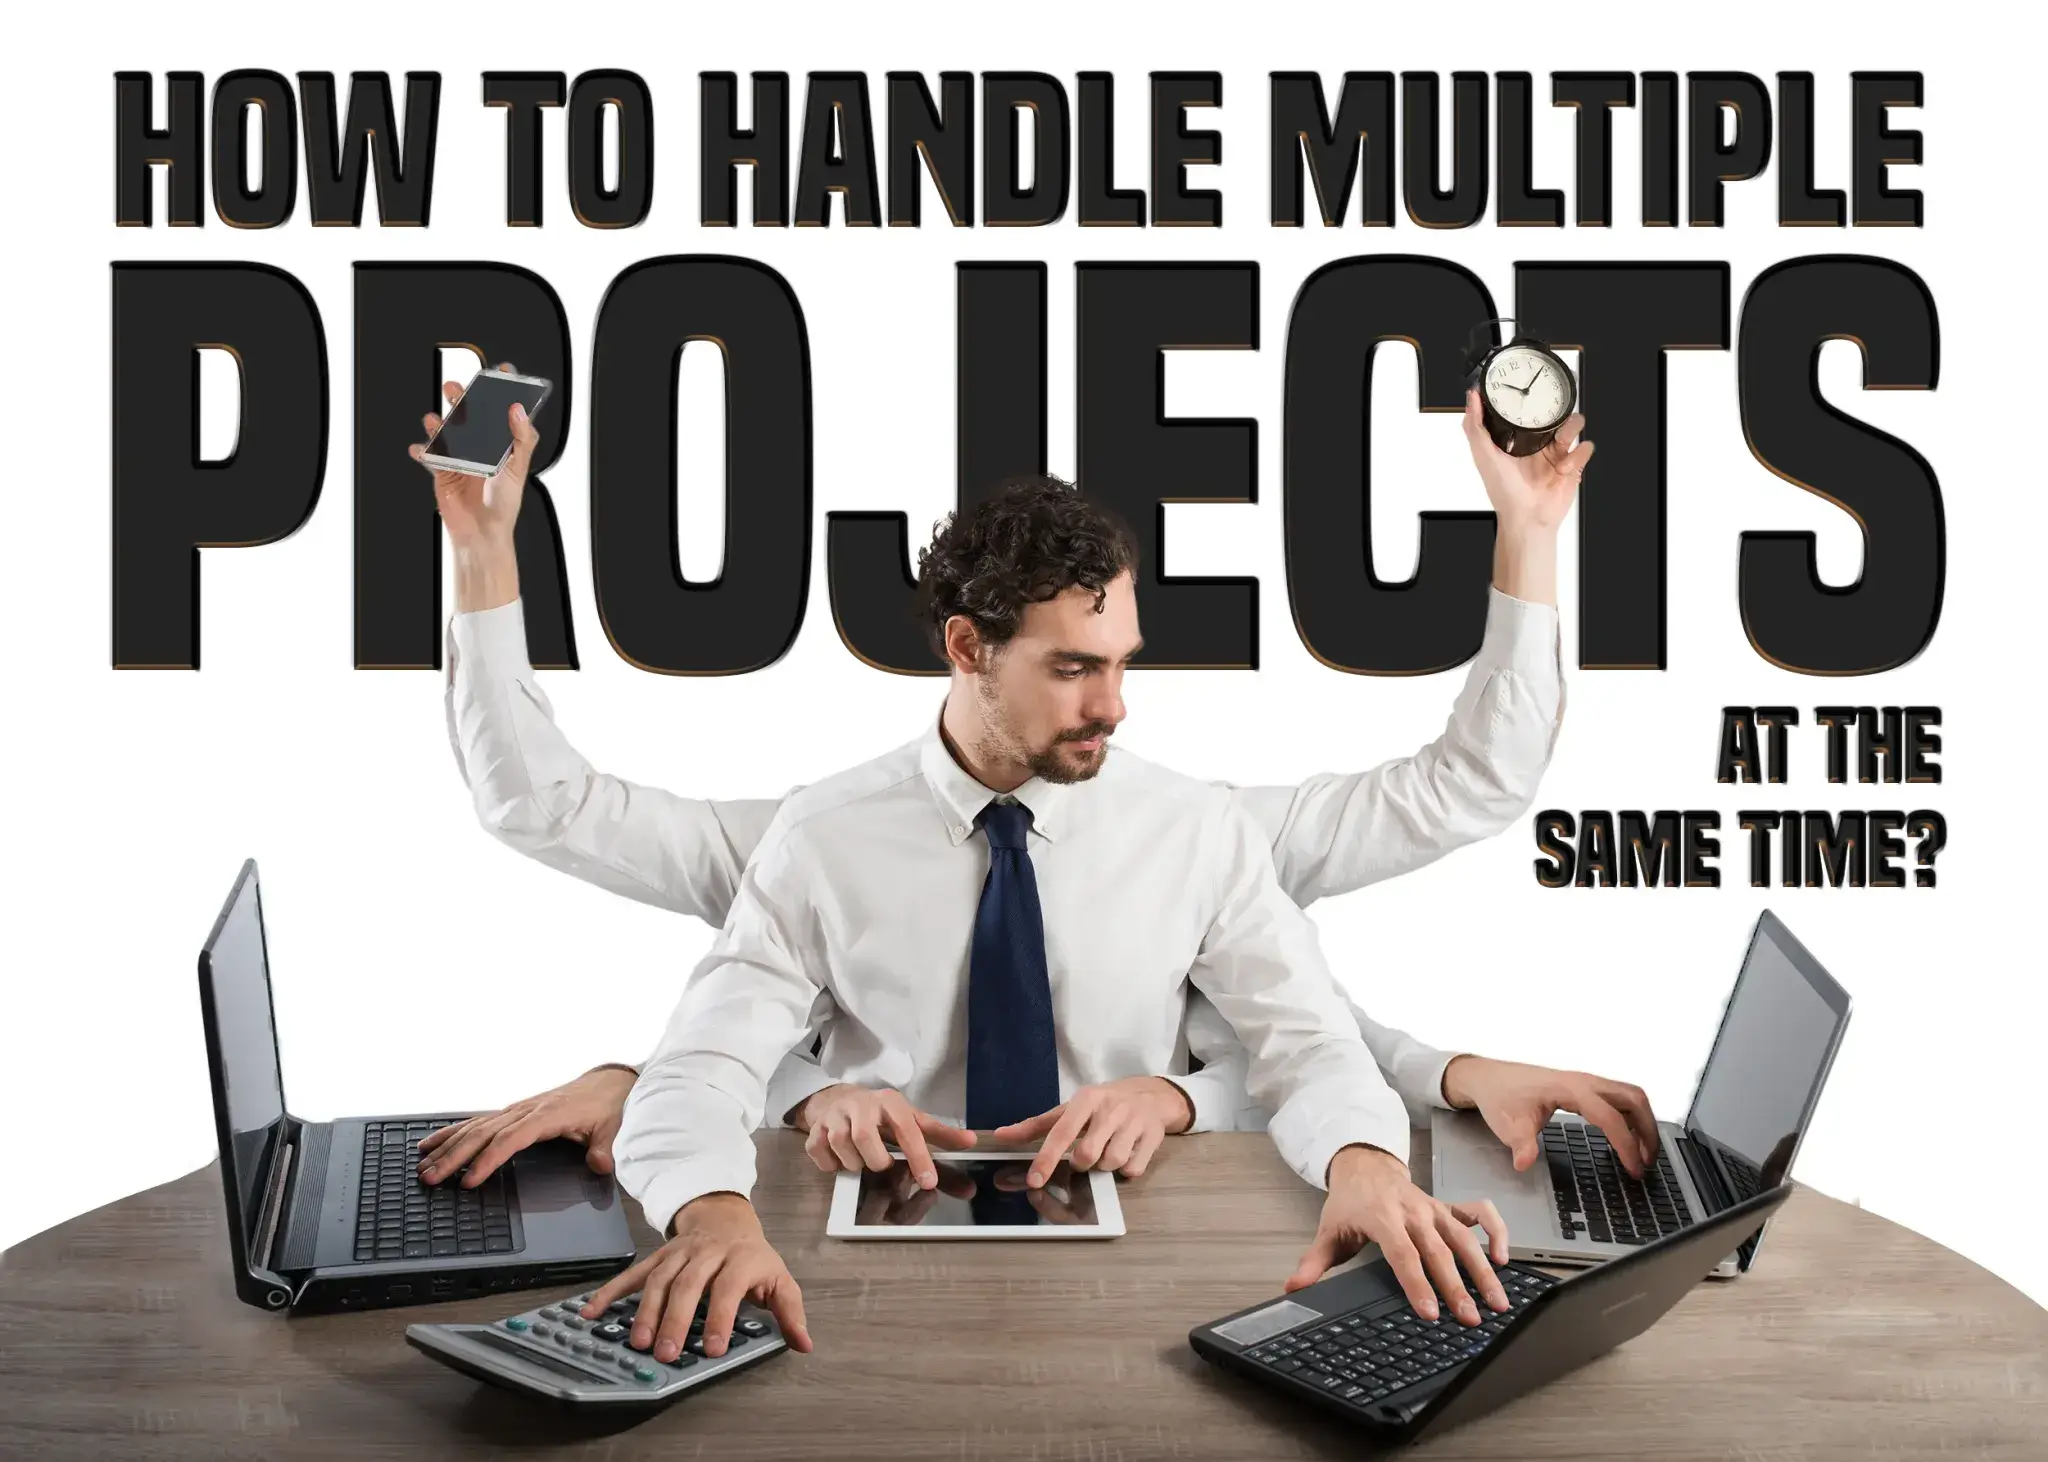 How to Handle Multiple Projects at the Same Time?